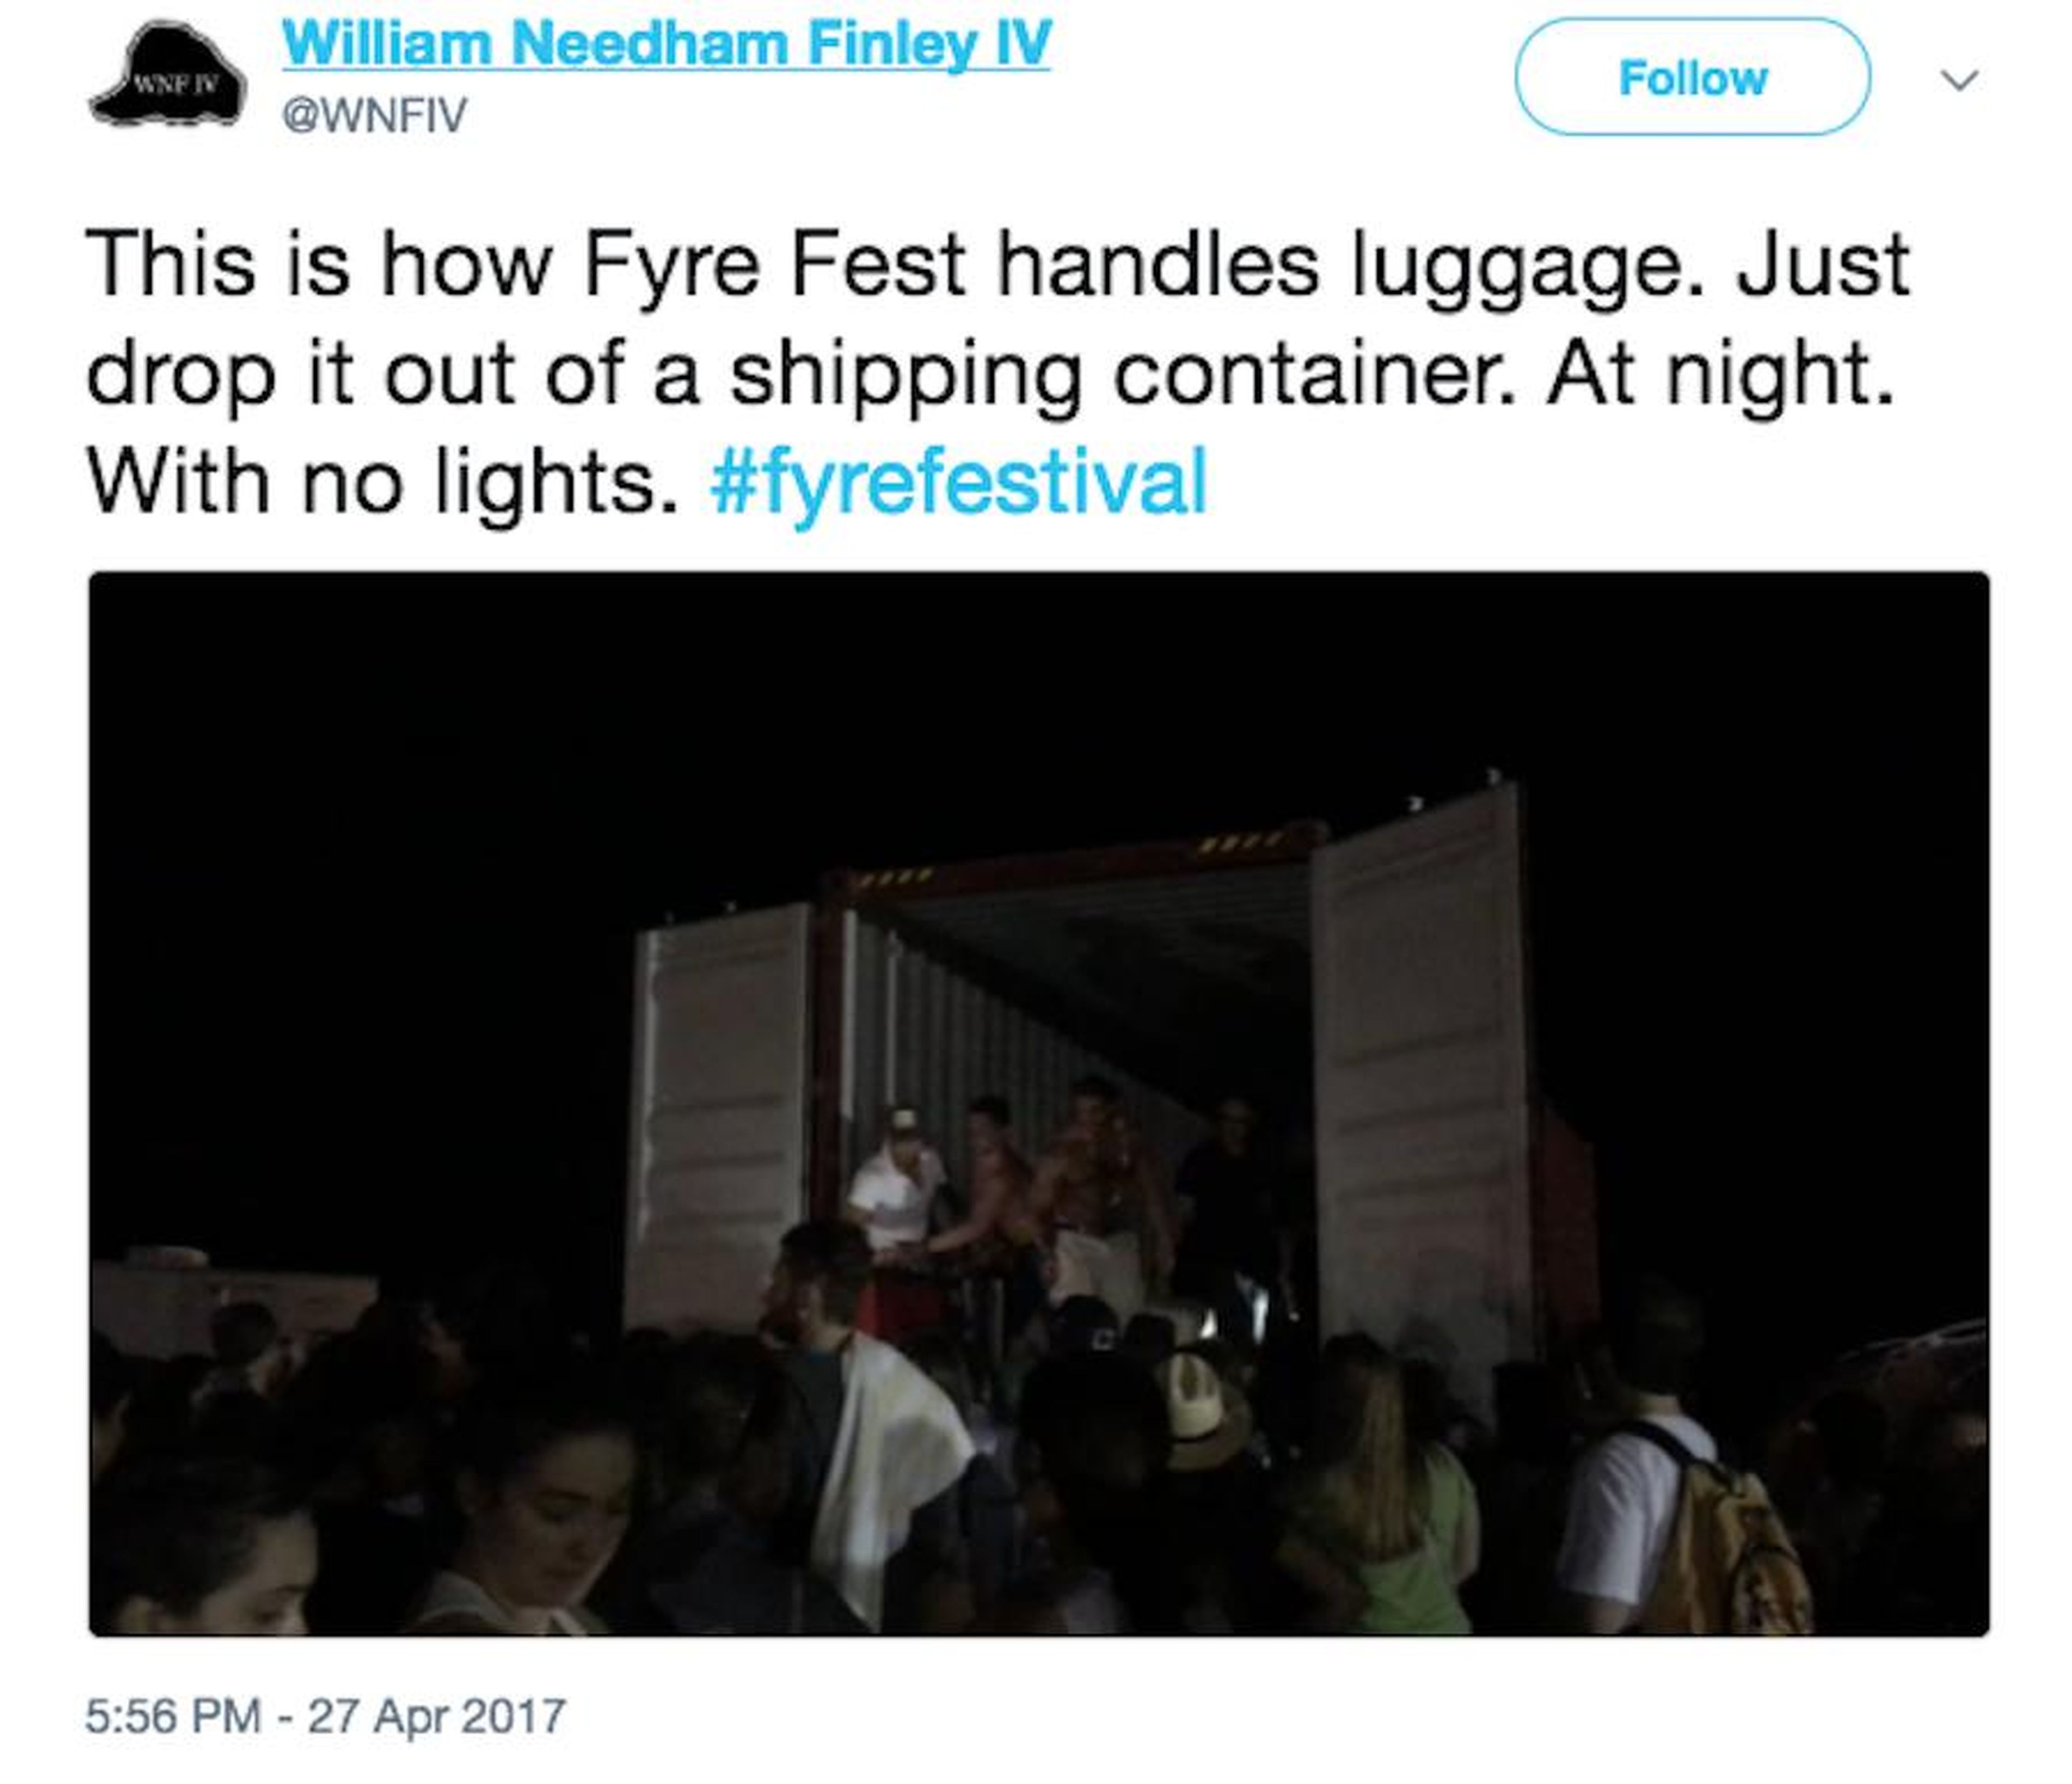 Instead, they ended up waiting for hours at the airport and collecting their luggage from the back of a shipping container in the dead of night.